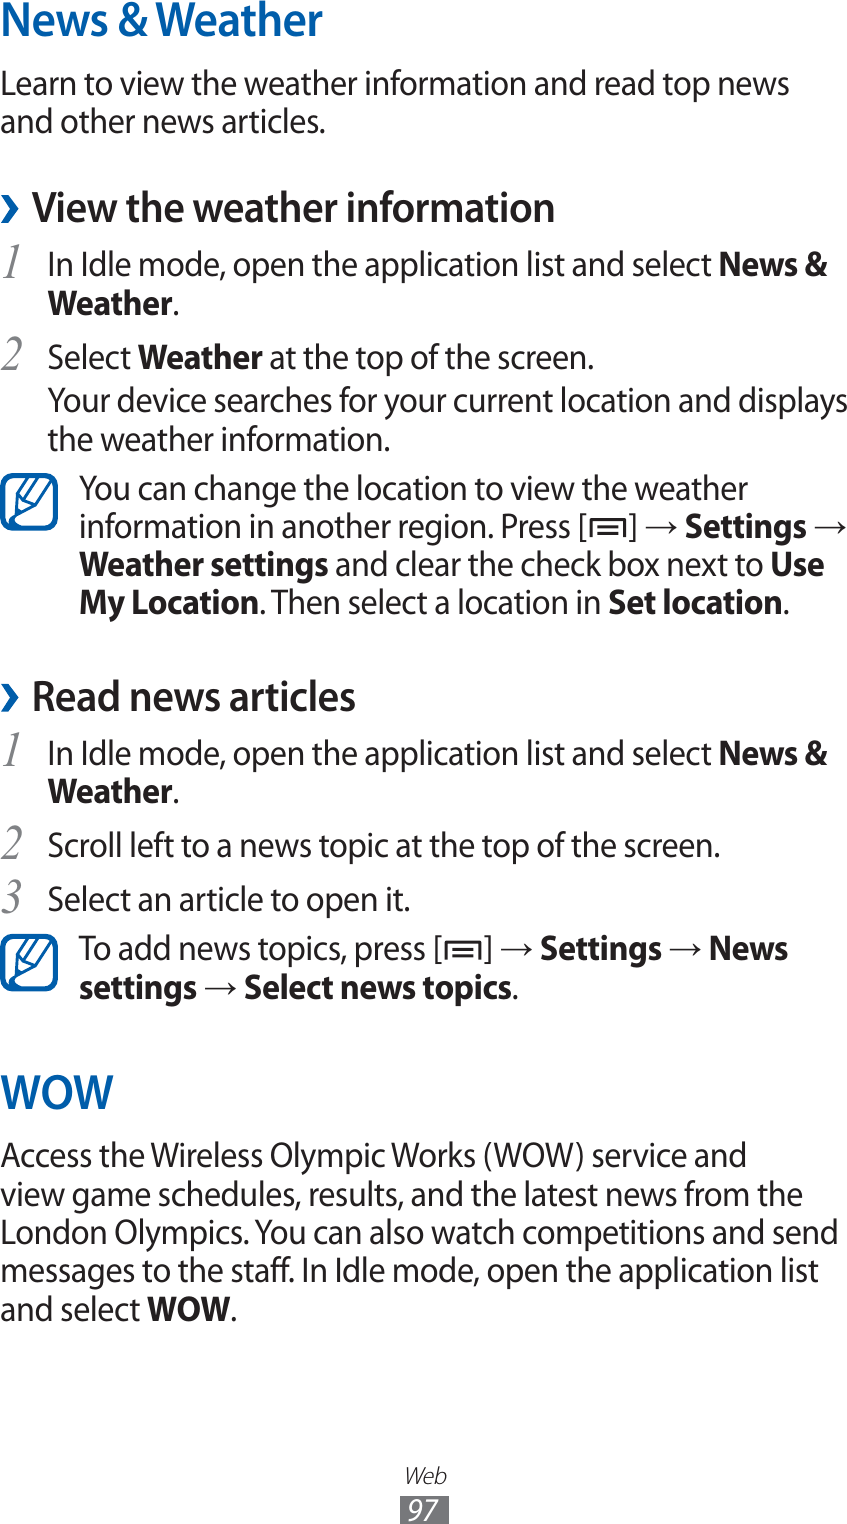 Web97News &amp; WeatherLearn to view the weather information and read top news and other news articles.View the weather information ›In Idle mode, open the application list and select 1 News &amp; Weather.Select 2 Weather at the top of the screen.Your device searches for your current location and displays the weather information.You can change the location to view the weather information in another region. Press [ ] → Settings → Weather settings and clear the check box next to Use My Location. Then select a location in Set location.Read news articles ›In Idle mode, open the application list and select 1 News &amp; Weather.Scroll left to a news topic at the top of the screen.2 Select an article to open it.3 To add news topics, press [ ] → Settings → News settings → Select news topics.WOWAccess the Wireless Olympic Works (WOW) service and view game schedules, results, and the latest news from the London Olympics. You can also watch competitions and send messages to the staff. In Idle mode, open the application list and select WOW.